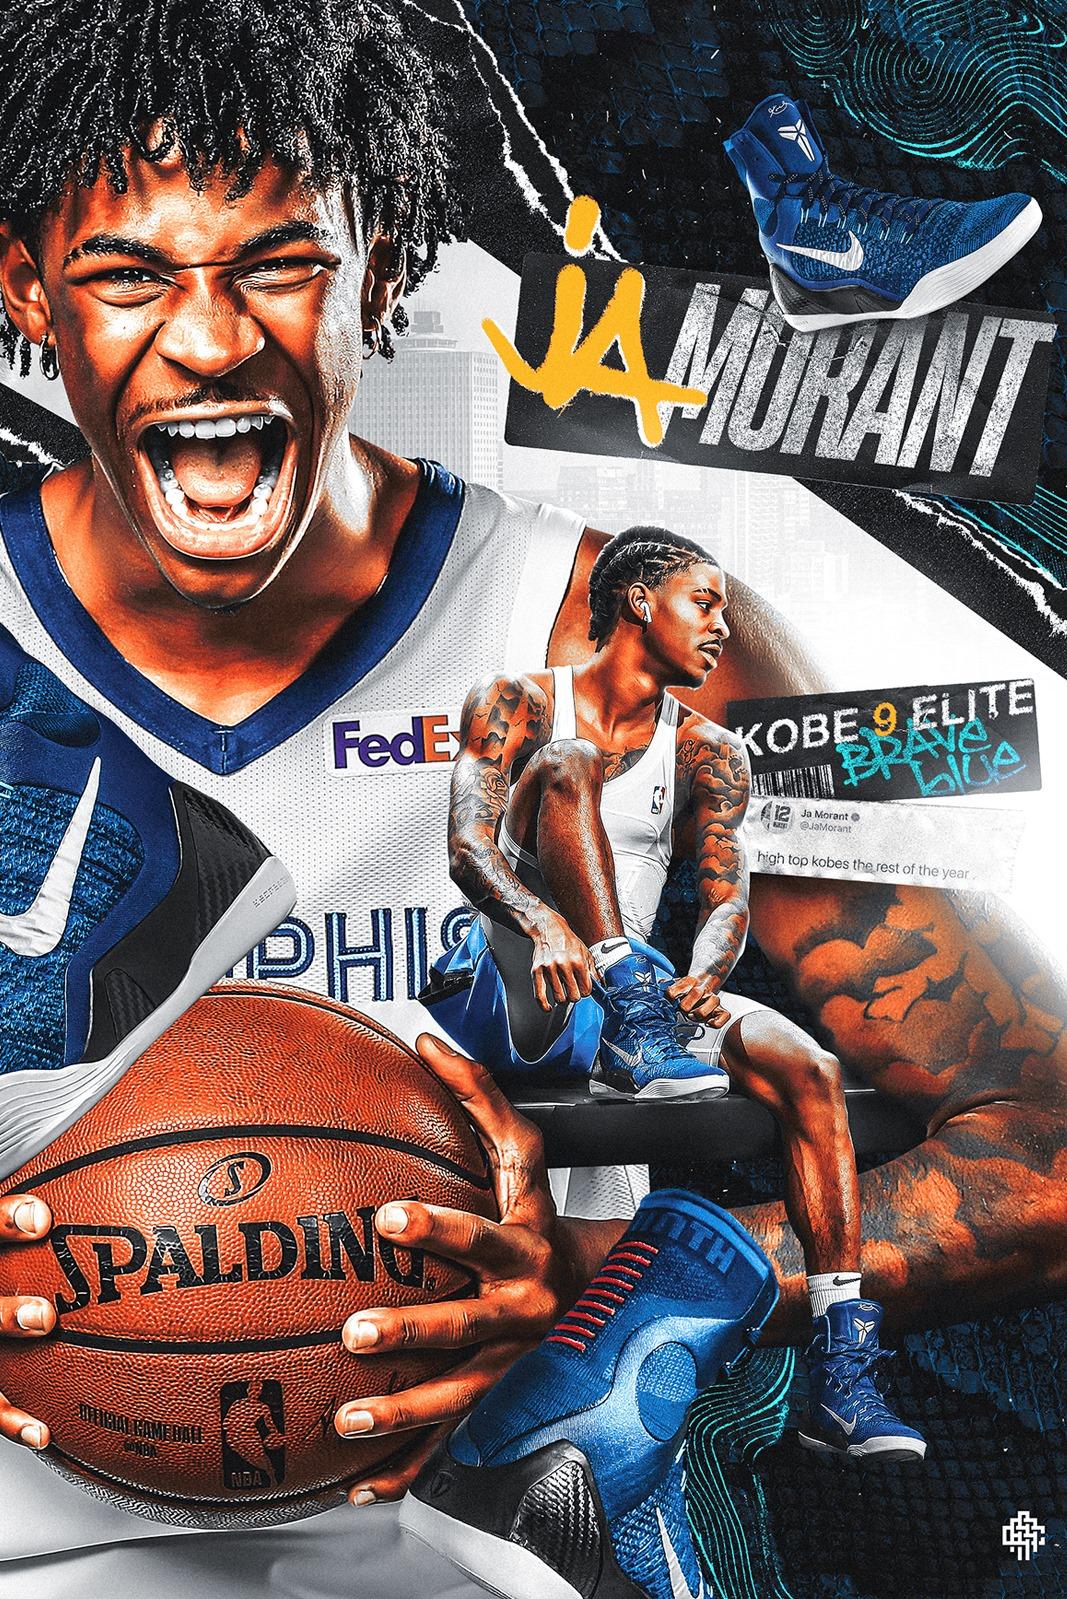 Imacc Sports Ja Morant Wallpaper for your phone Please Like and